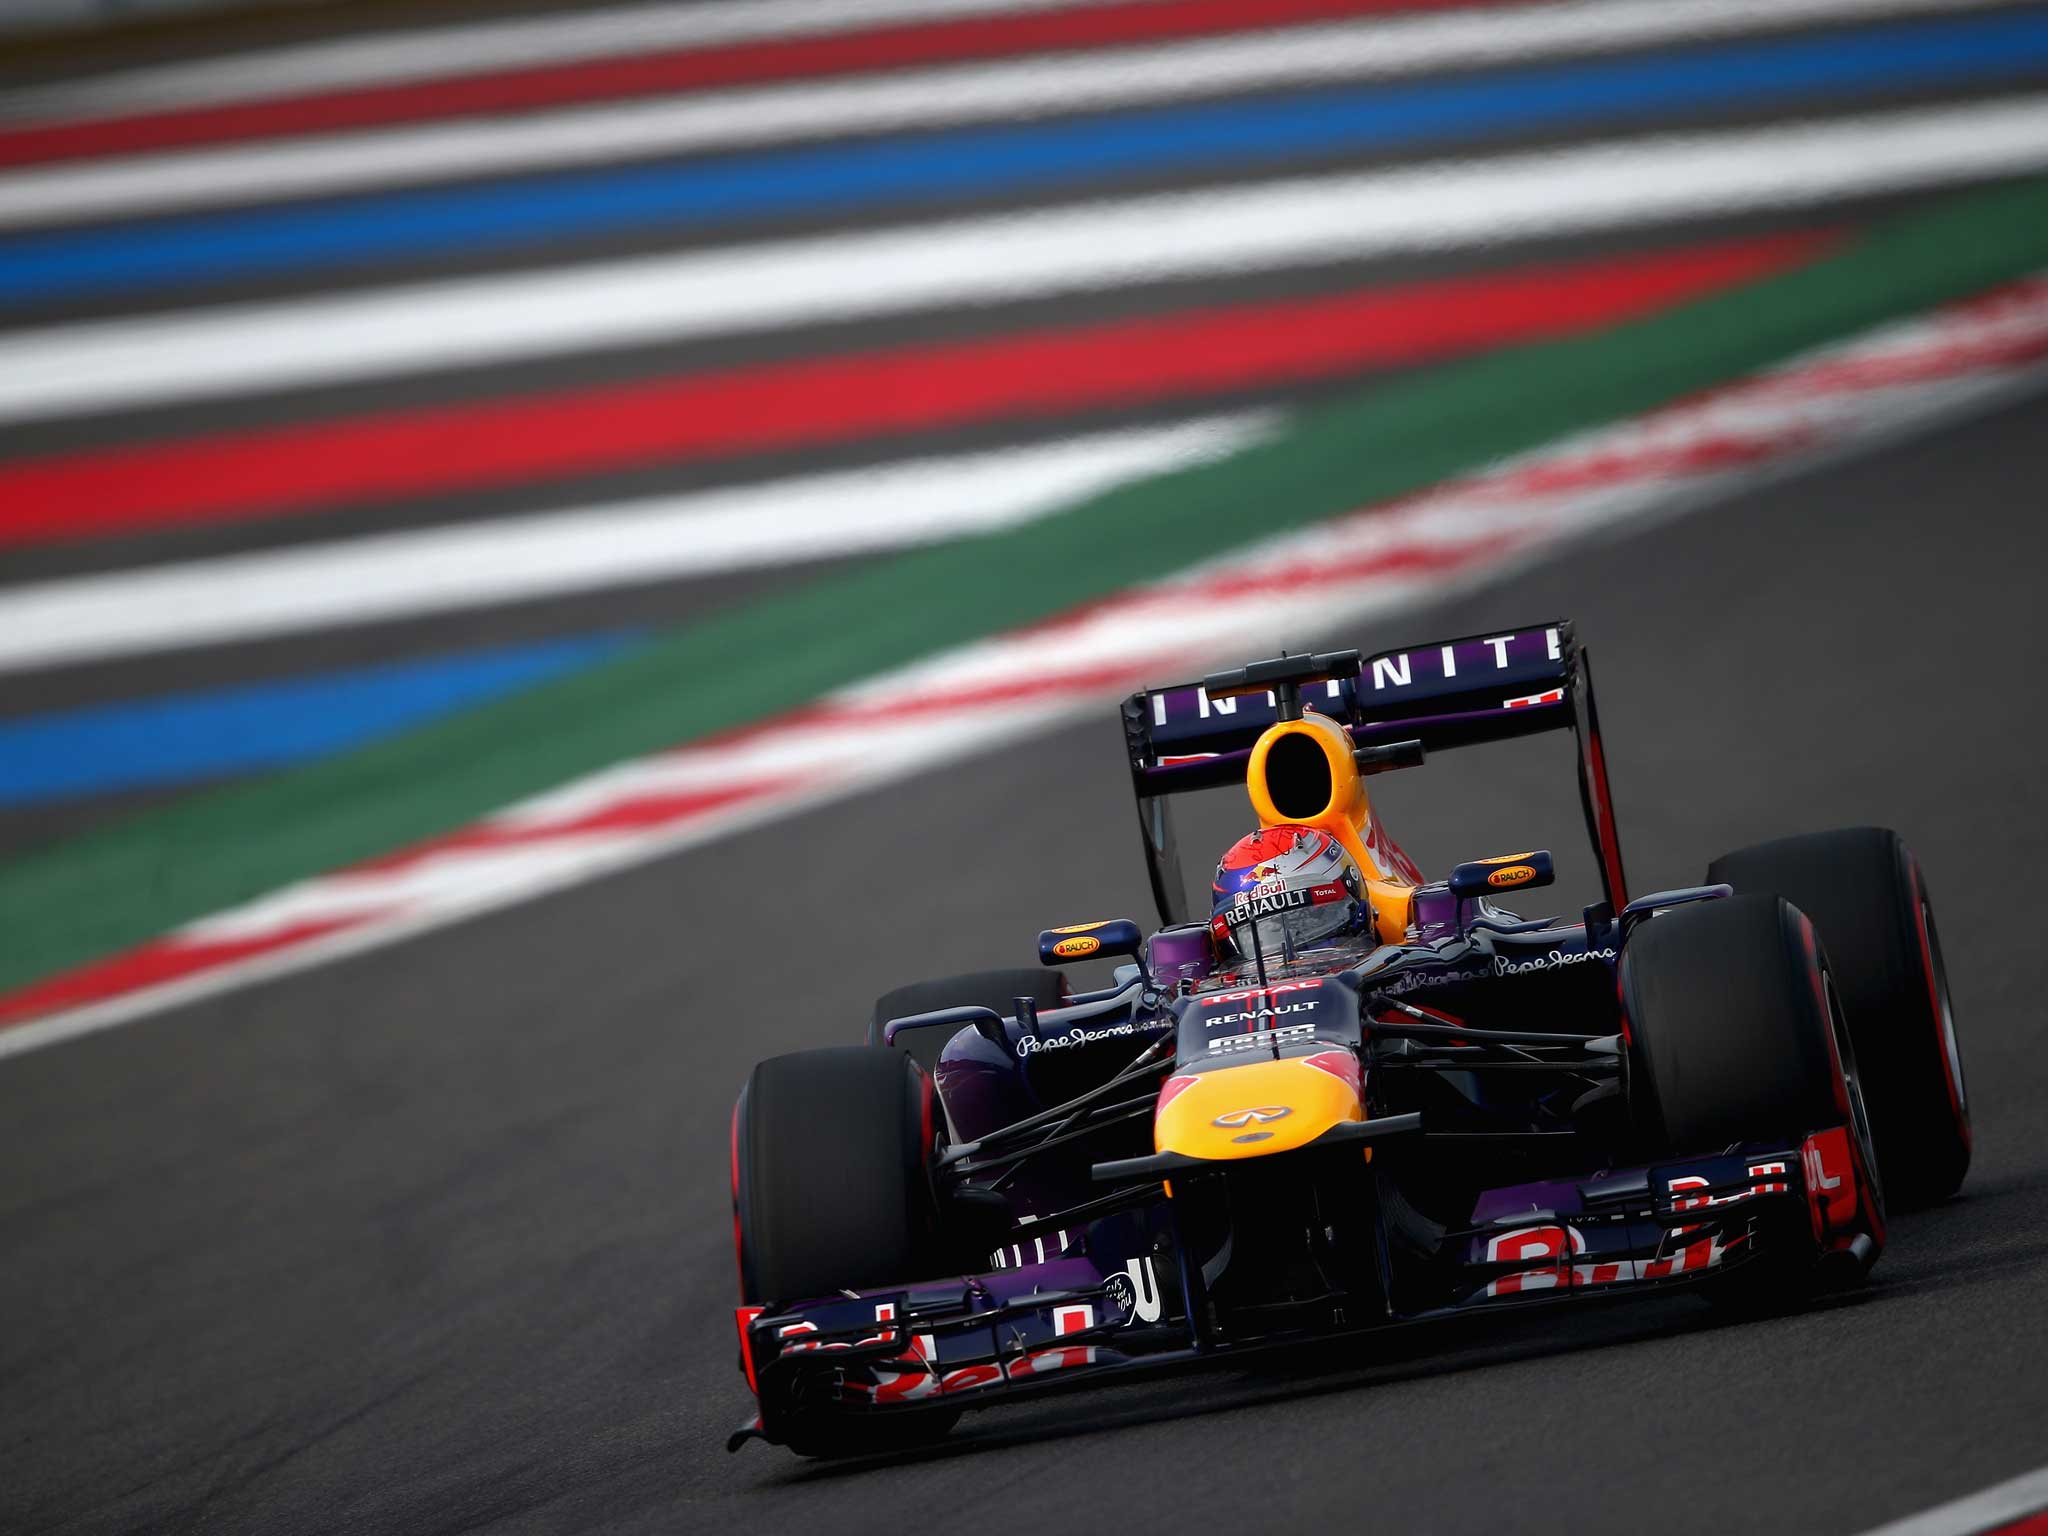 The Red Bull driver finished just over two tenths of a second faster than Mercedes star Hamilton